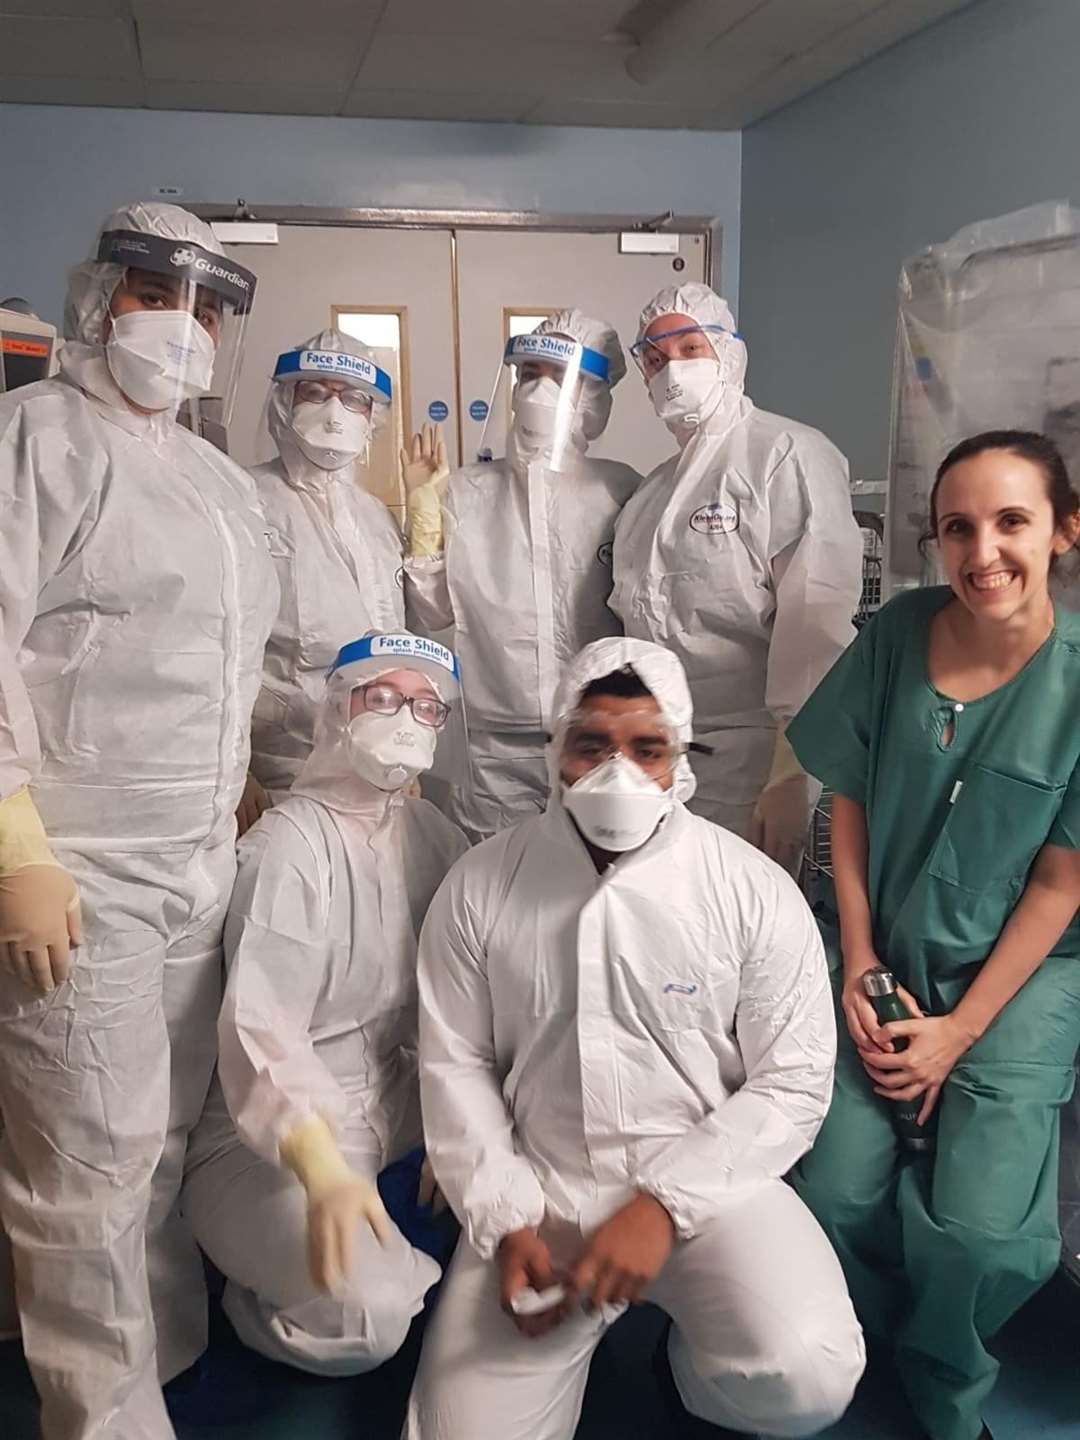 Many NHS teams, like this one from Darent Valley Hospital, have been supported by donors working to provide PPE clinically safe for teams to use